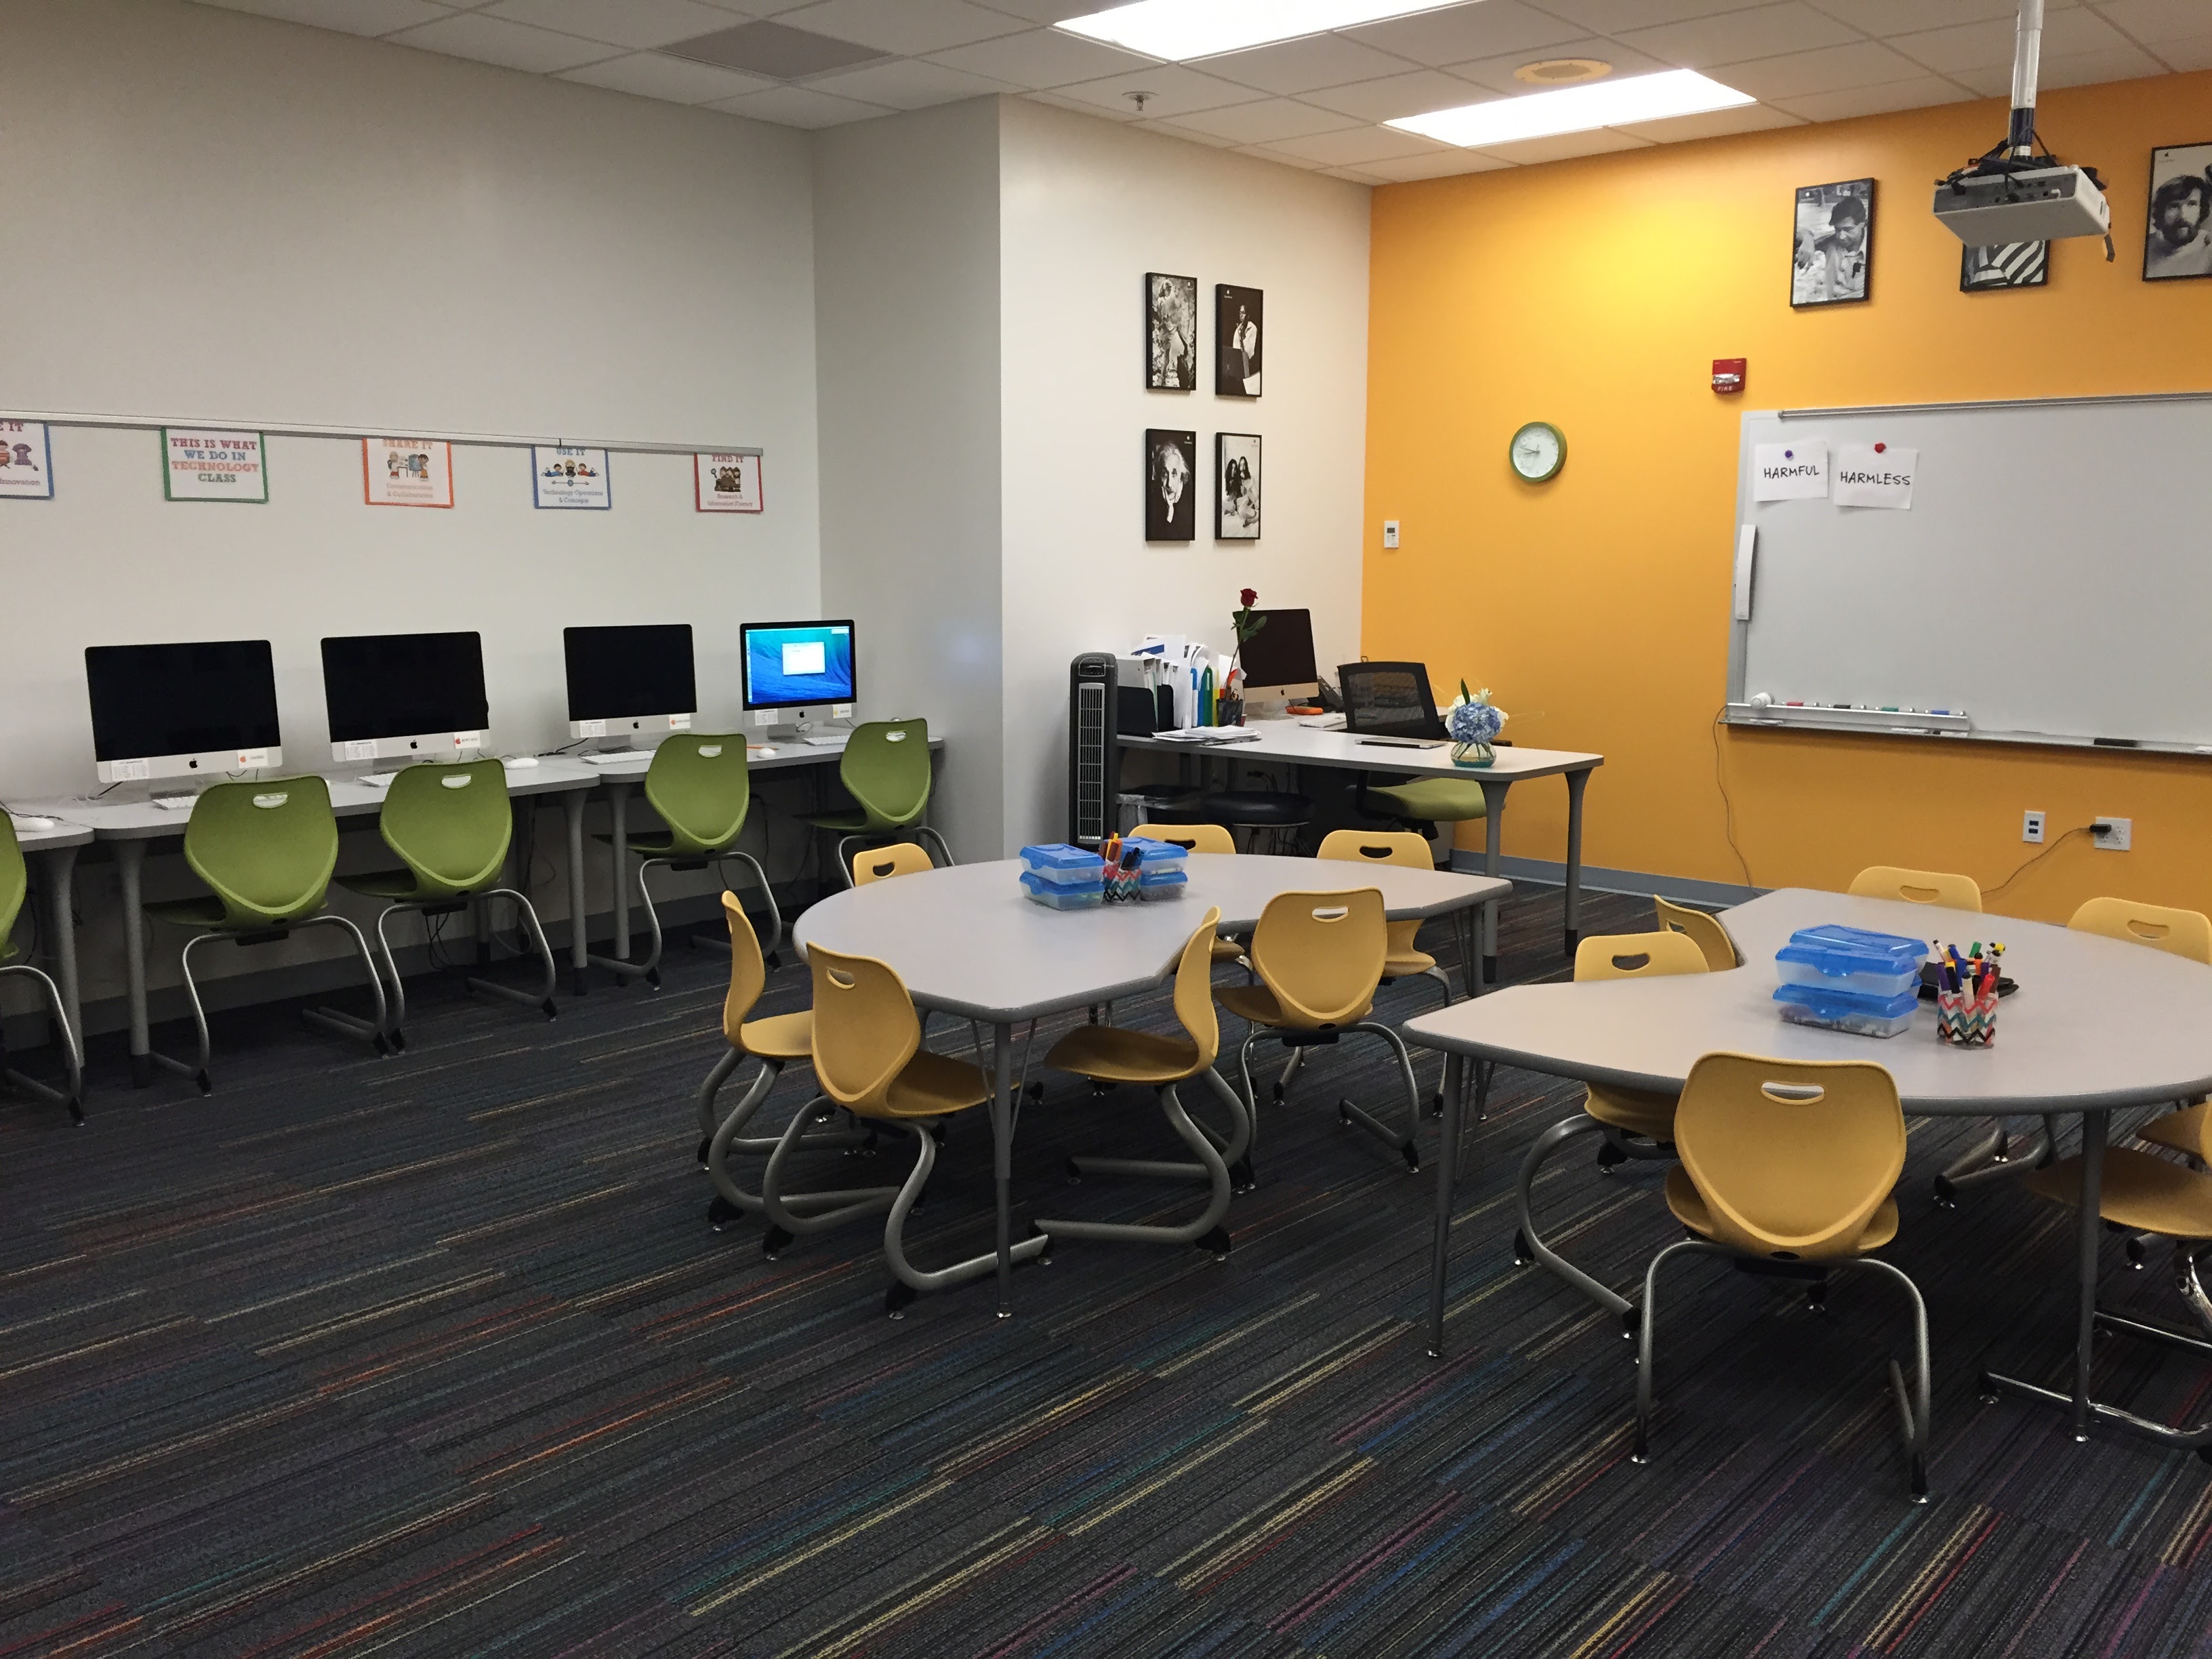 Classroom Design for an Optimized Learning Space - myViewBoard Blog